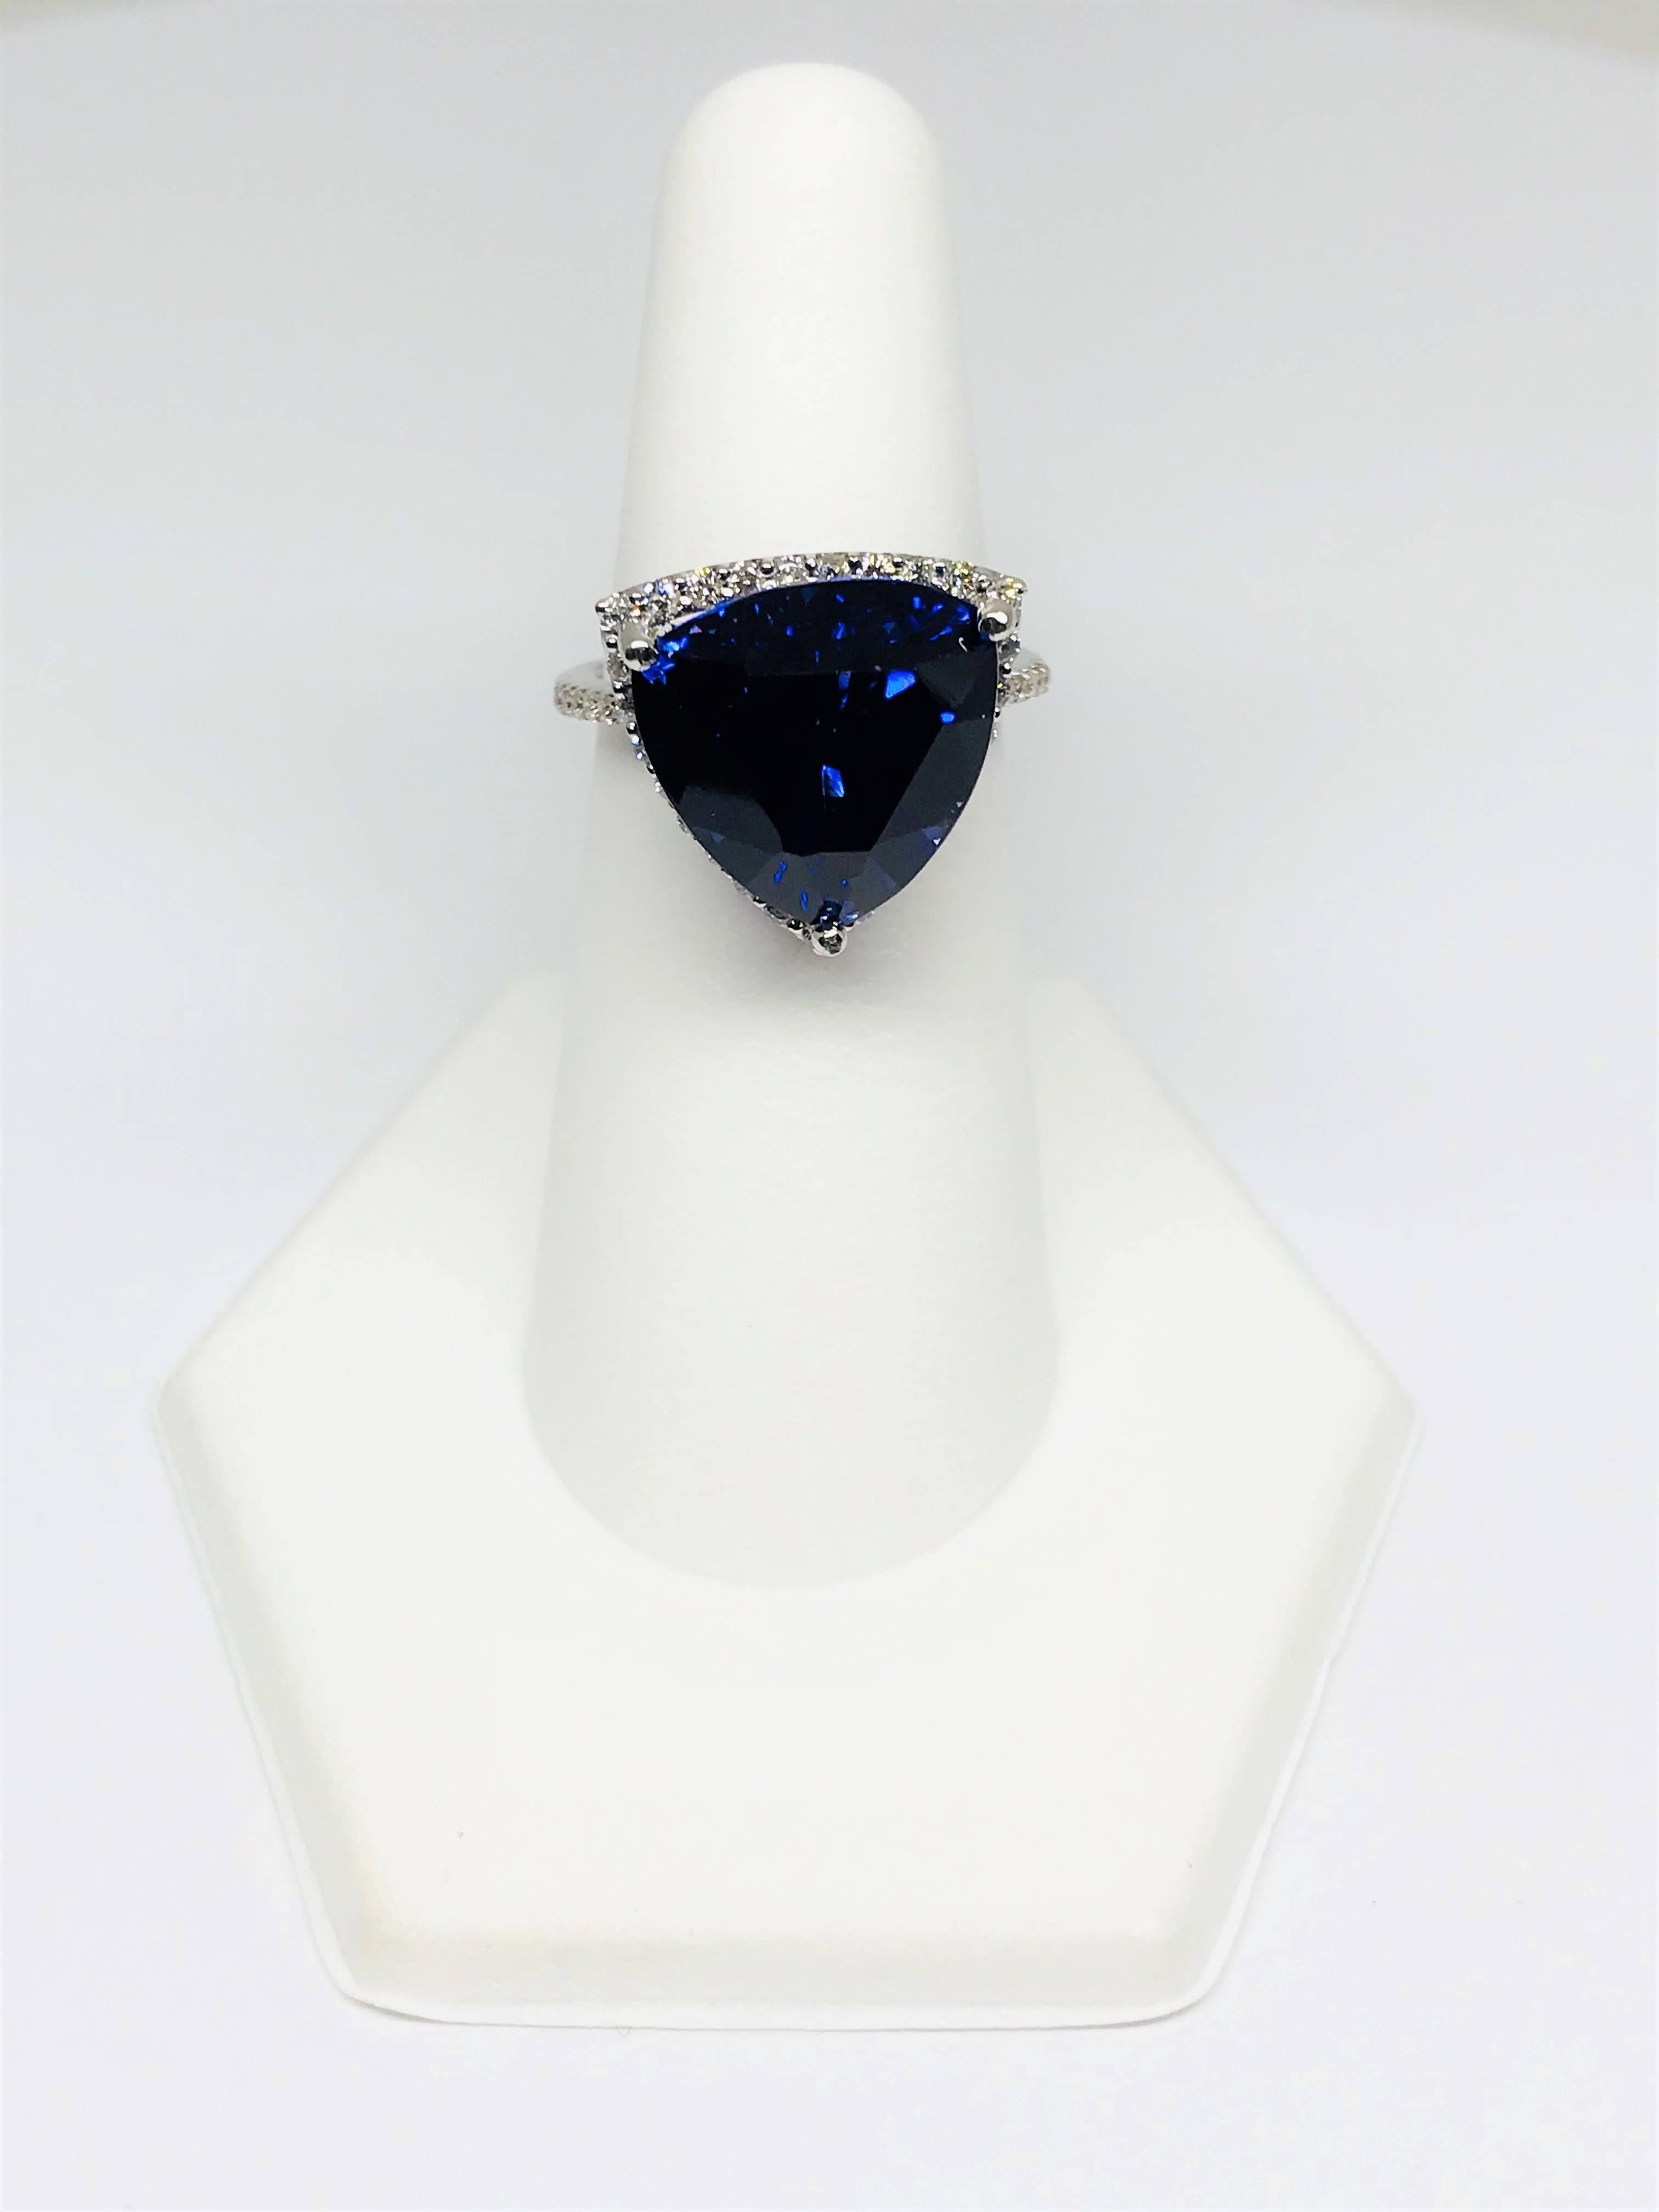 Stunning trillion shape natural 11.71 carat Tanzanite and Diamond halo 14k white gold ring. The Tanzanite measures 13.00 x 13.00 mm! It is a gorgeous vivid violetish ink blue color with strong saturation and medium tone. The halo and shoulder are